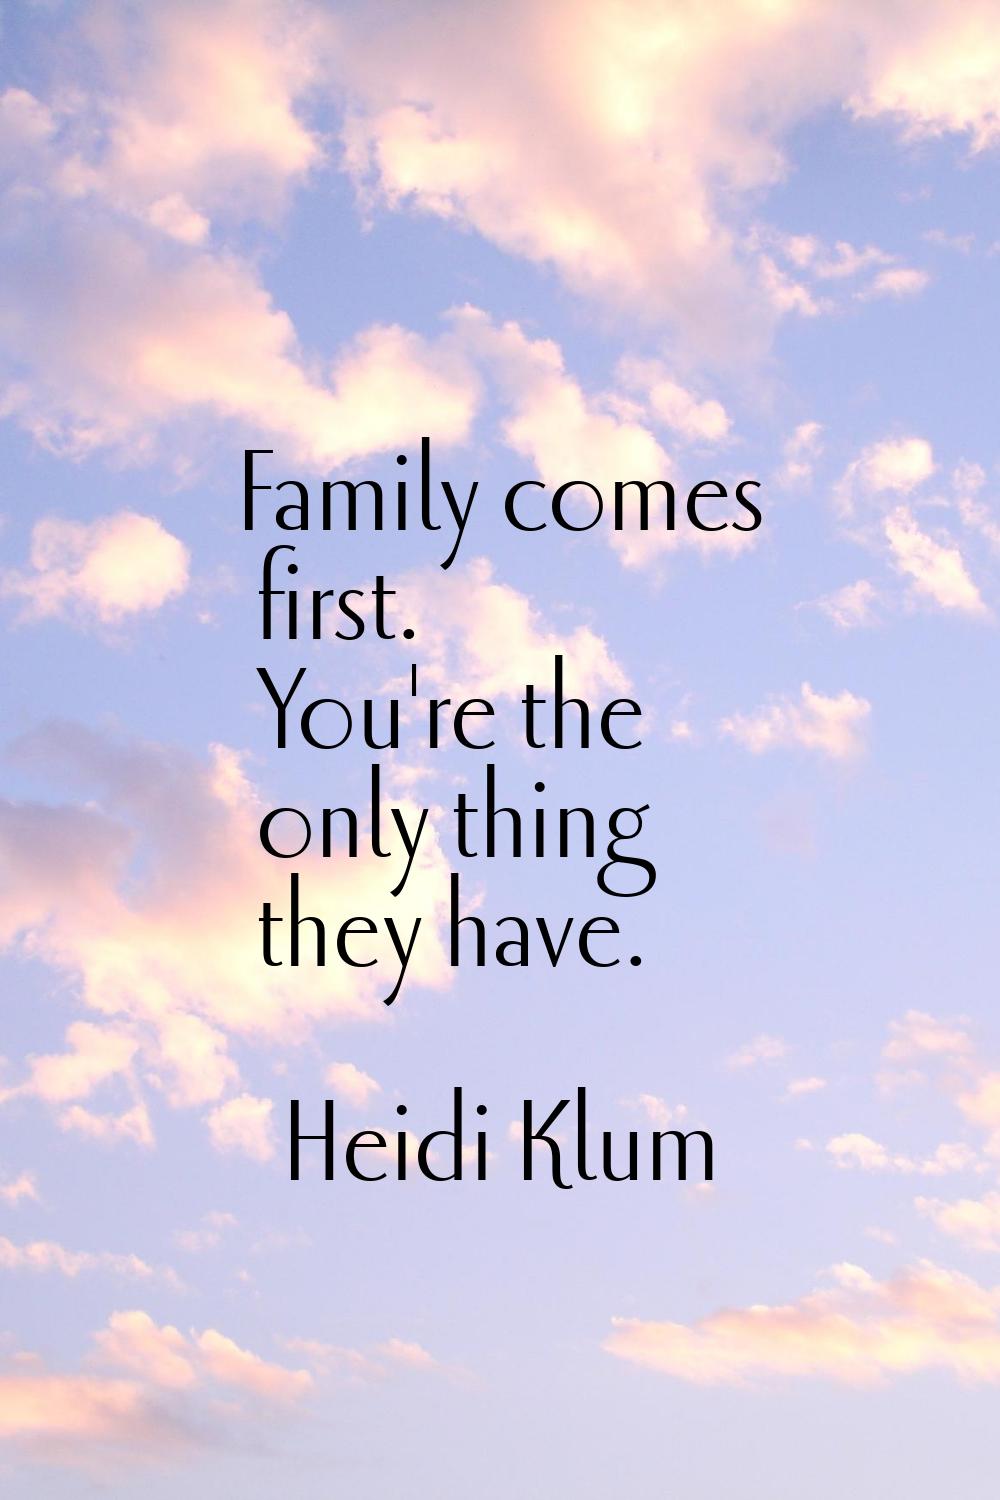 Family comes first. You're the only thing they have.